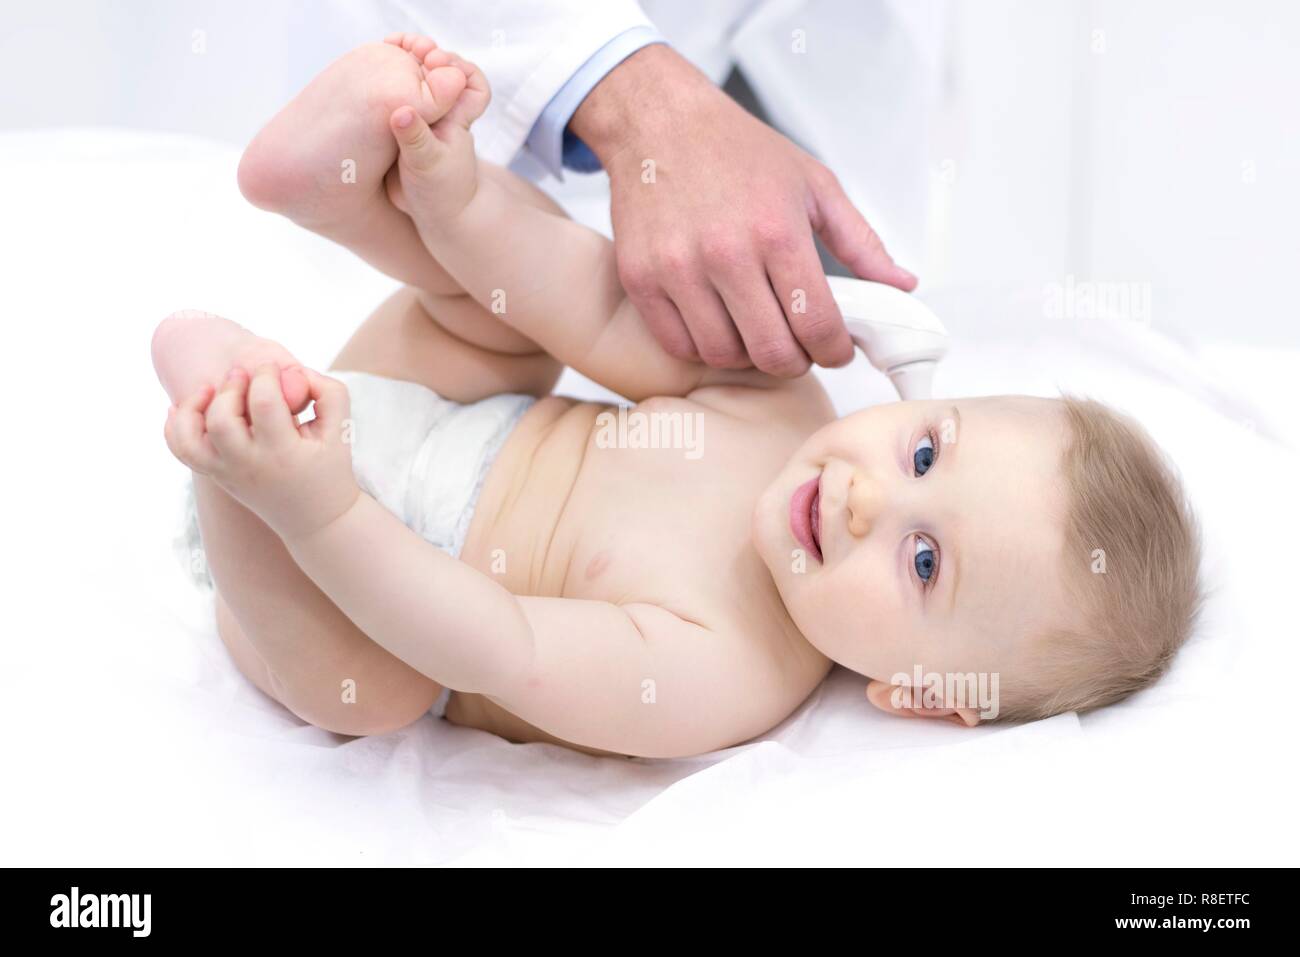 Doctor taking baby's temperature using digital thermometer. Stock Photo